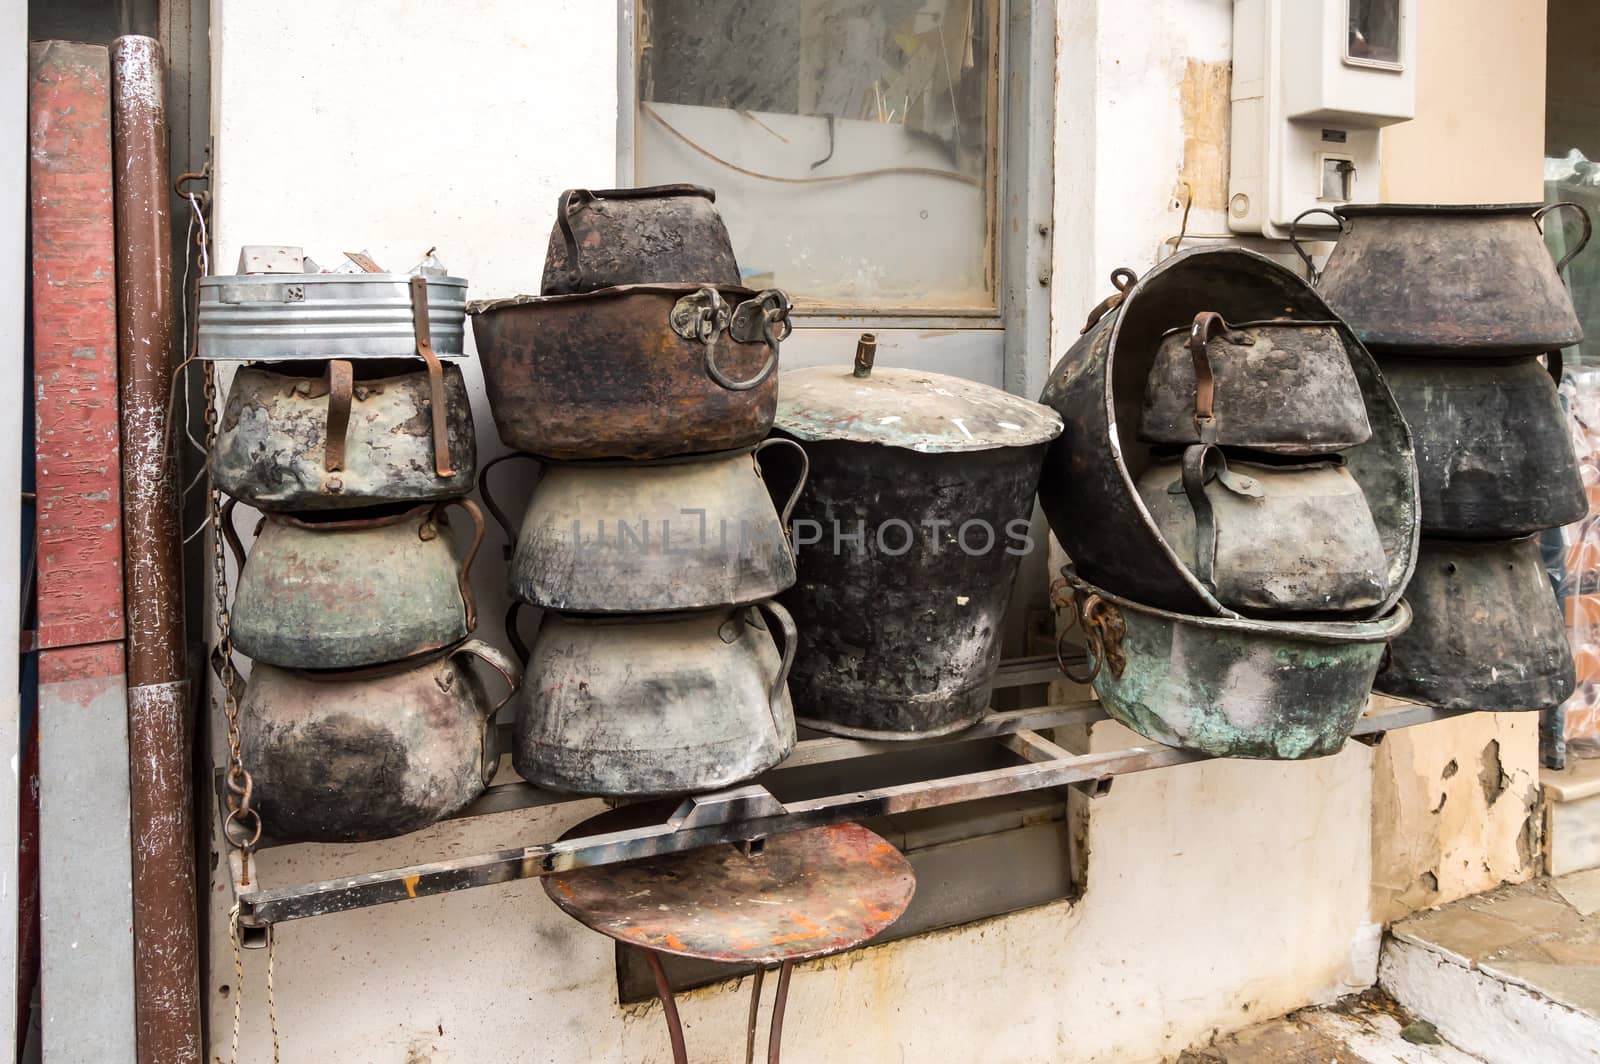 Several old cauldrons in heap in front of a facade